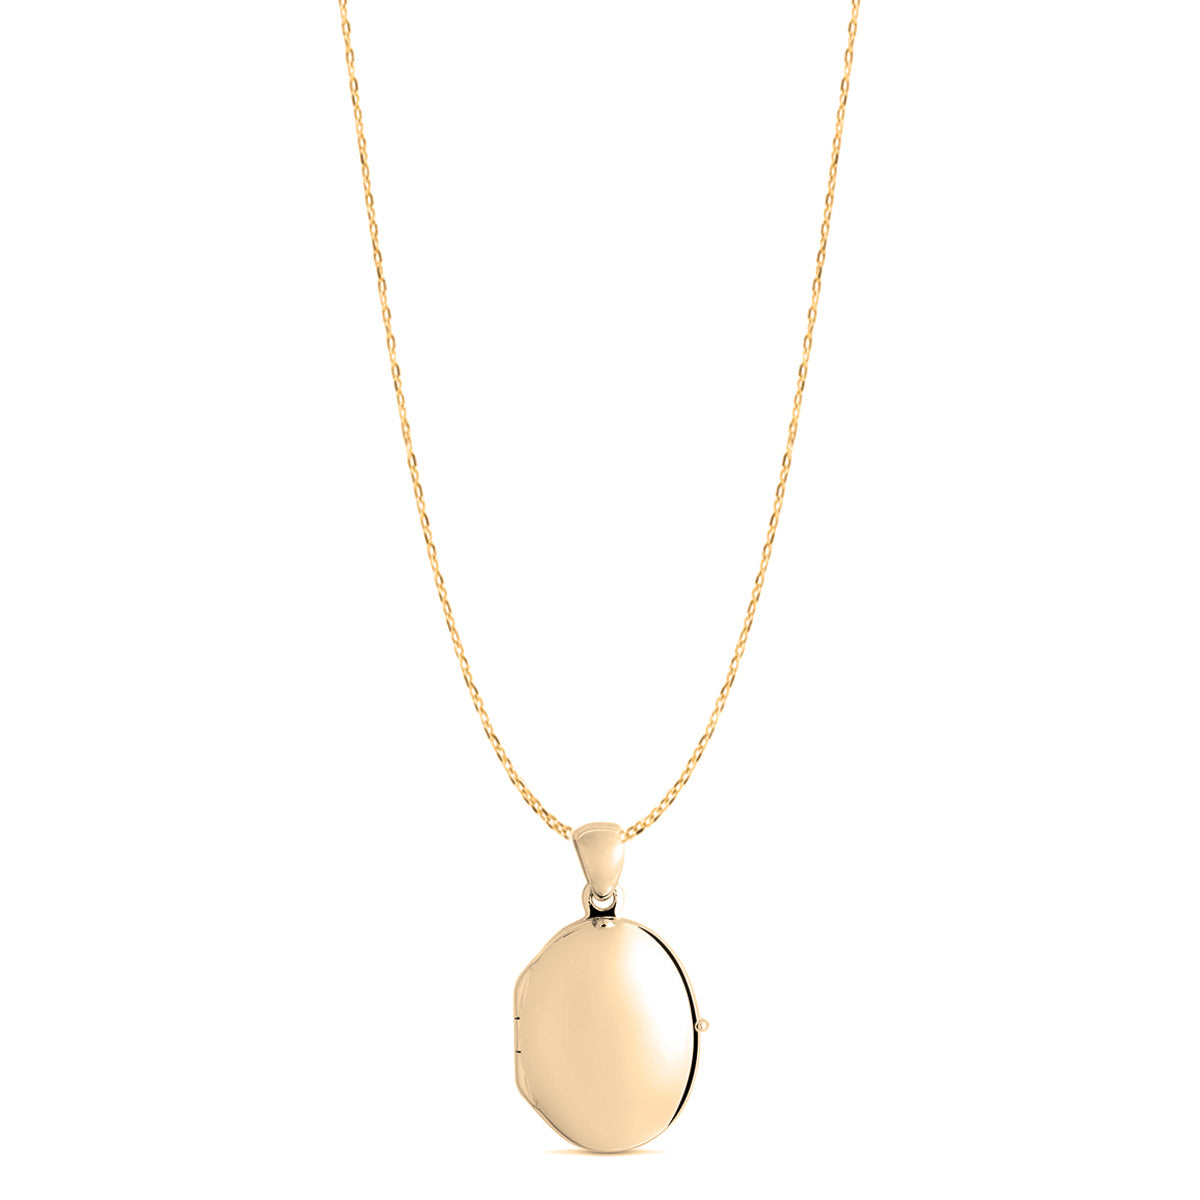 Solid 9ct Gold Oval Locket